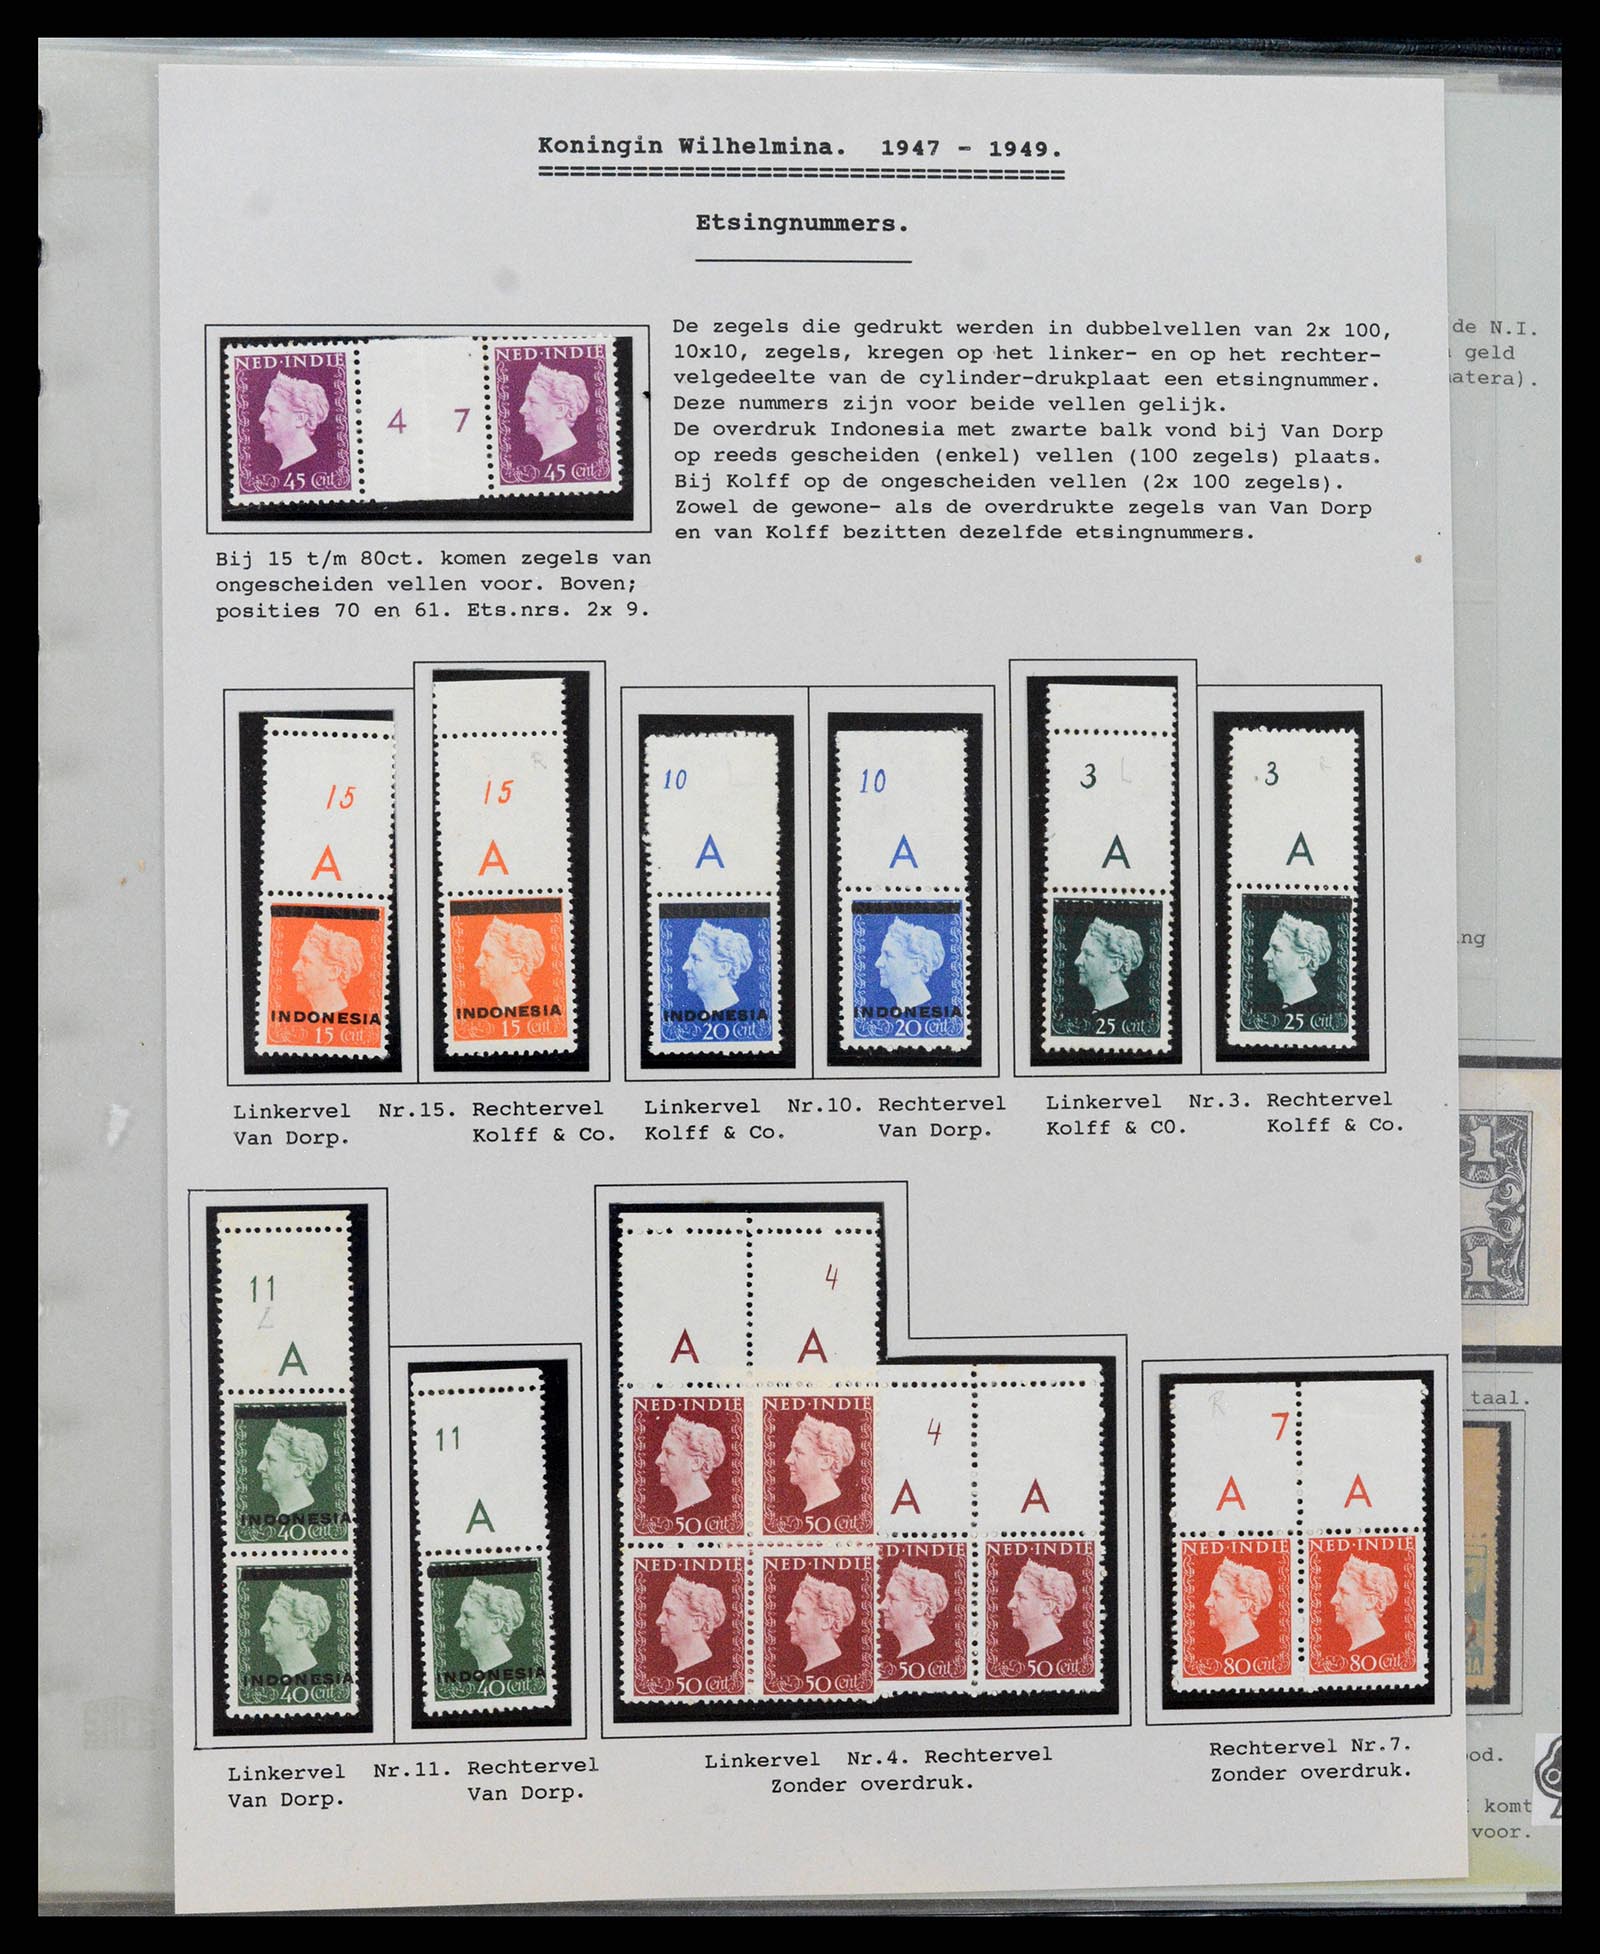 37689 033 - Stamp collection 37689 Japanese occupation Dutch East Indies and interim